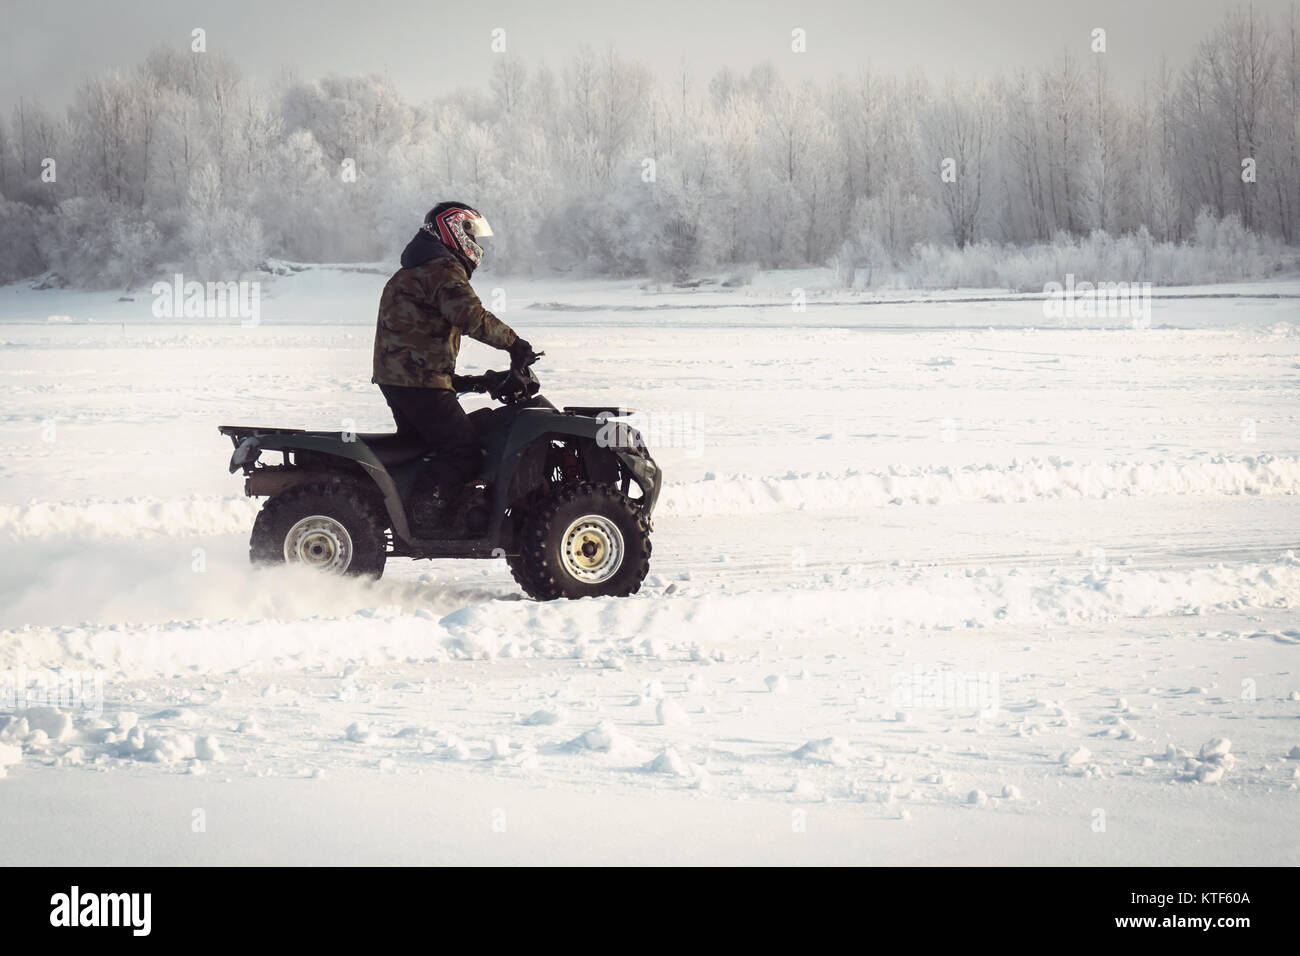 Winter fun on the ATV. A fisherman rides on the frozen lake in winter quartro bike on the background of beautiful winter landscape with snow-covered t Stock Photo